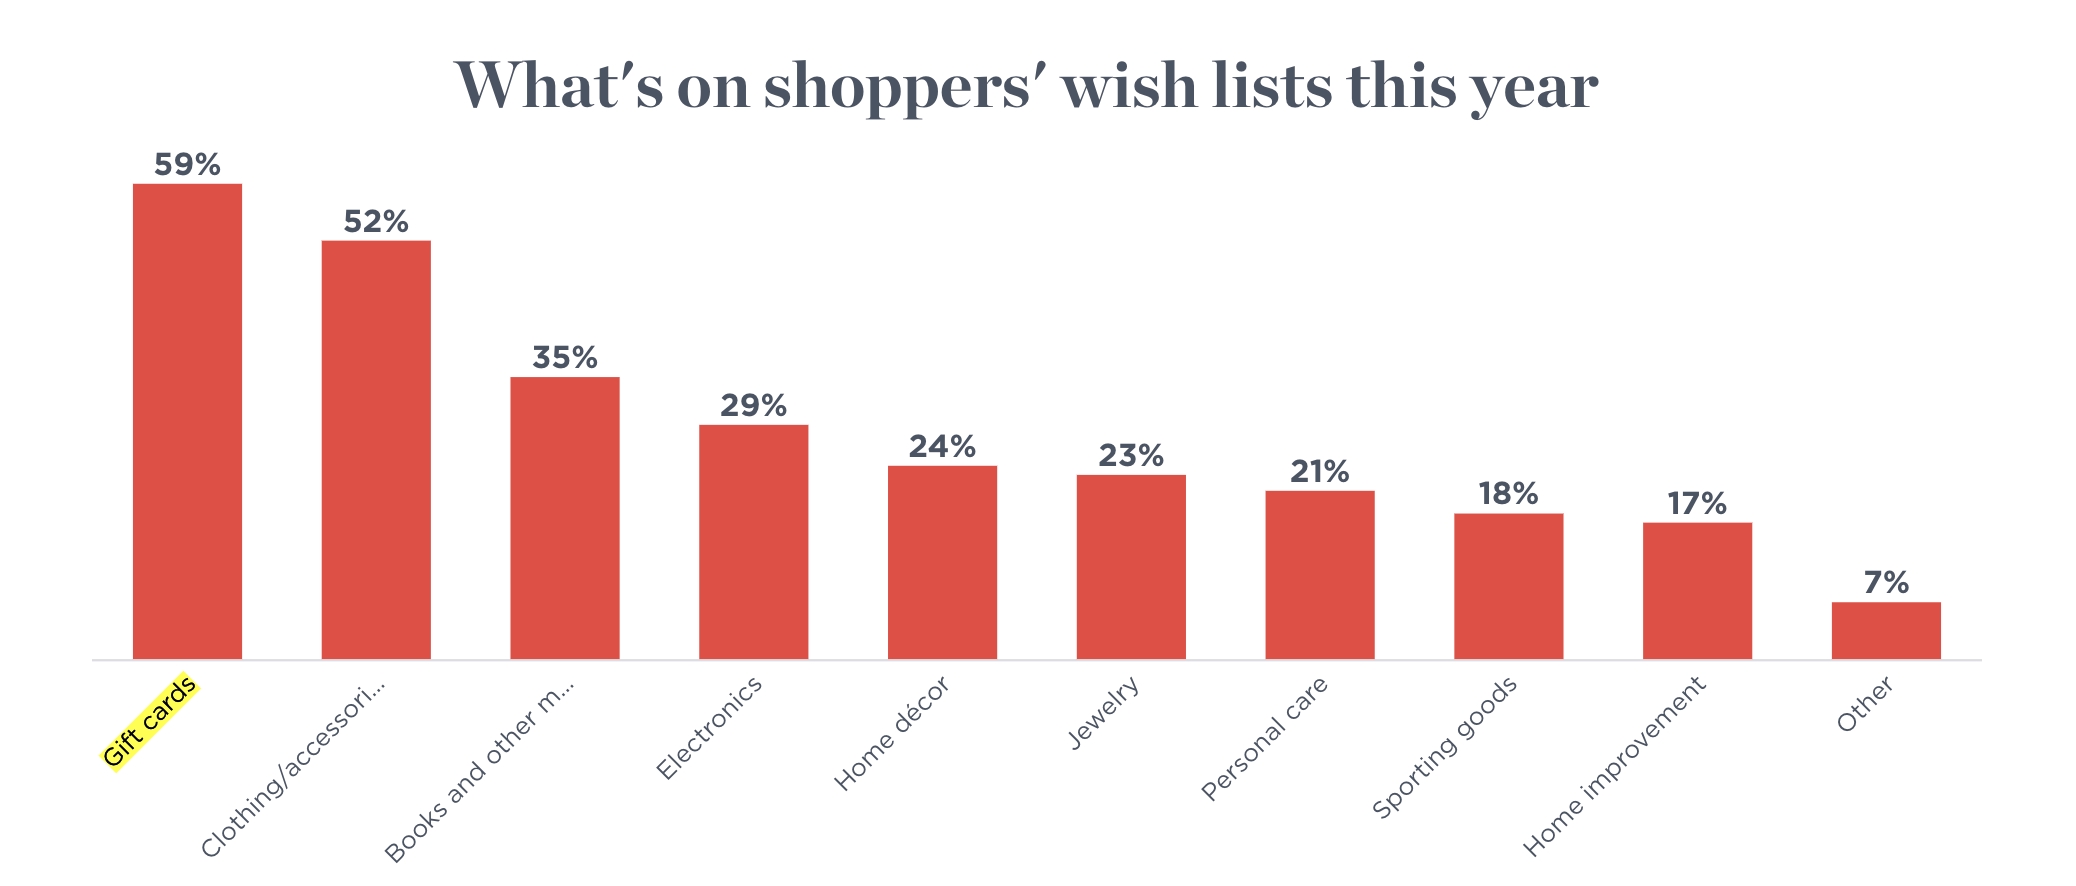 NRF whats on shoppers' wish lists this year